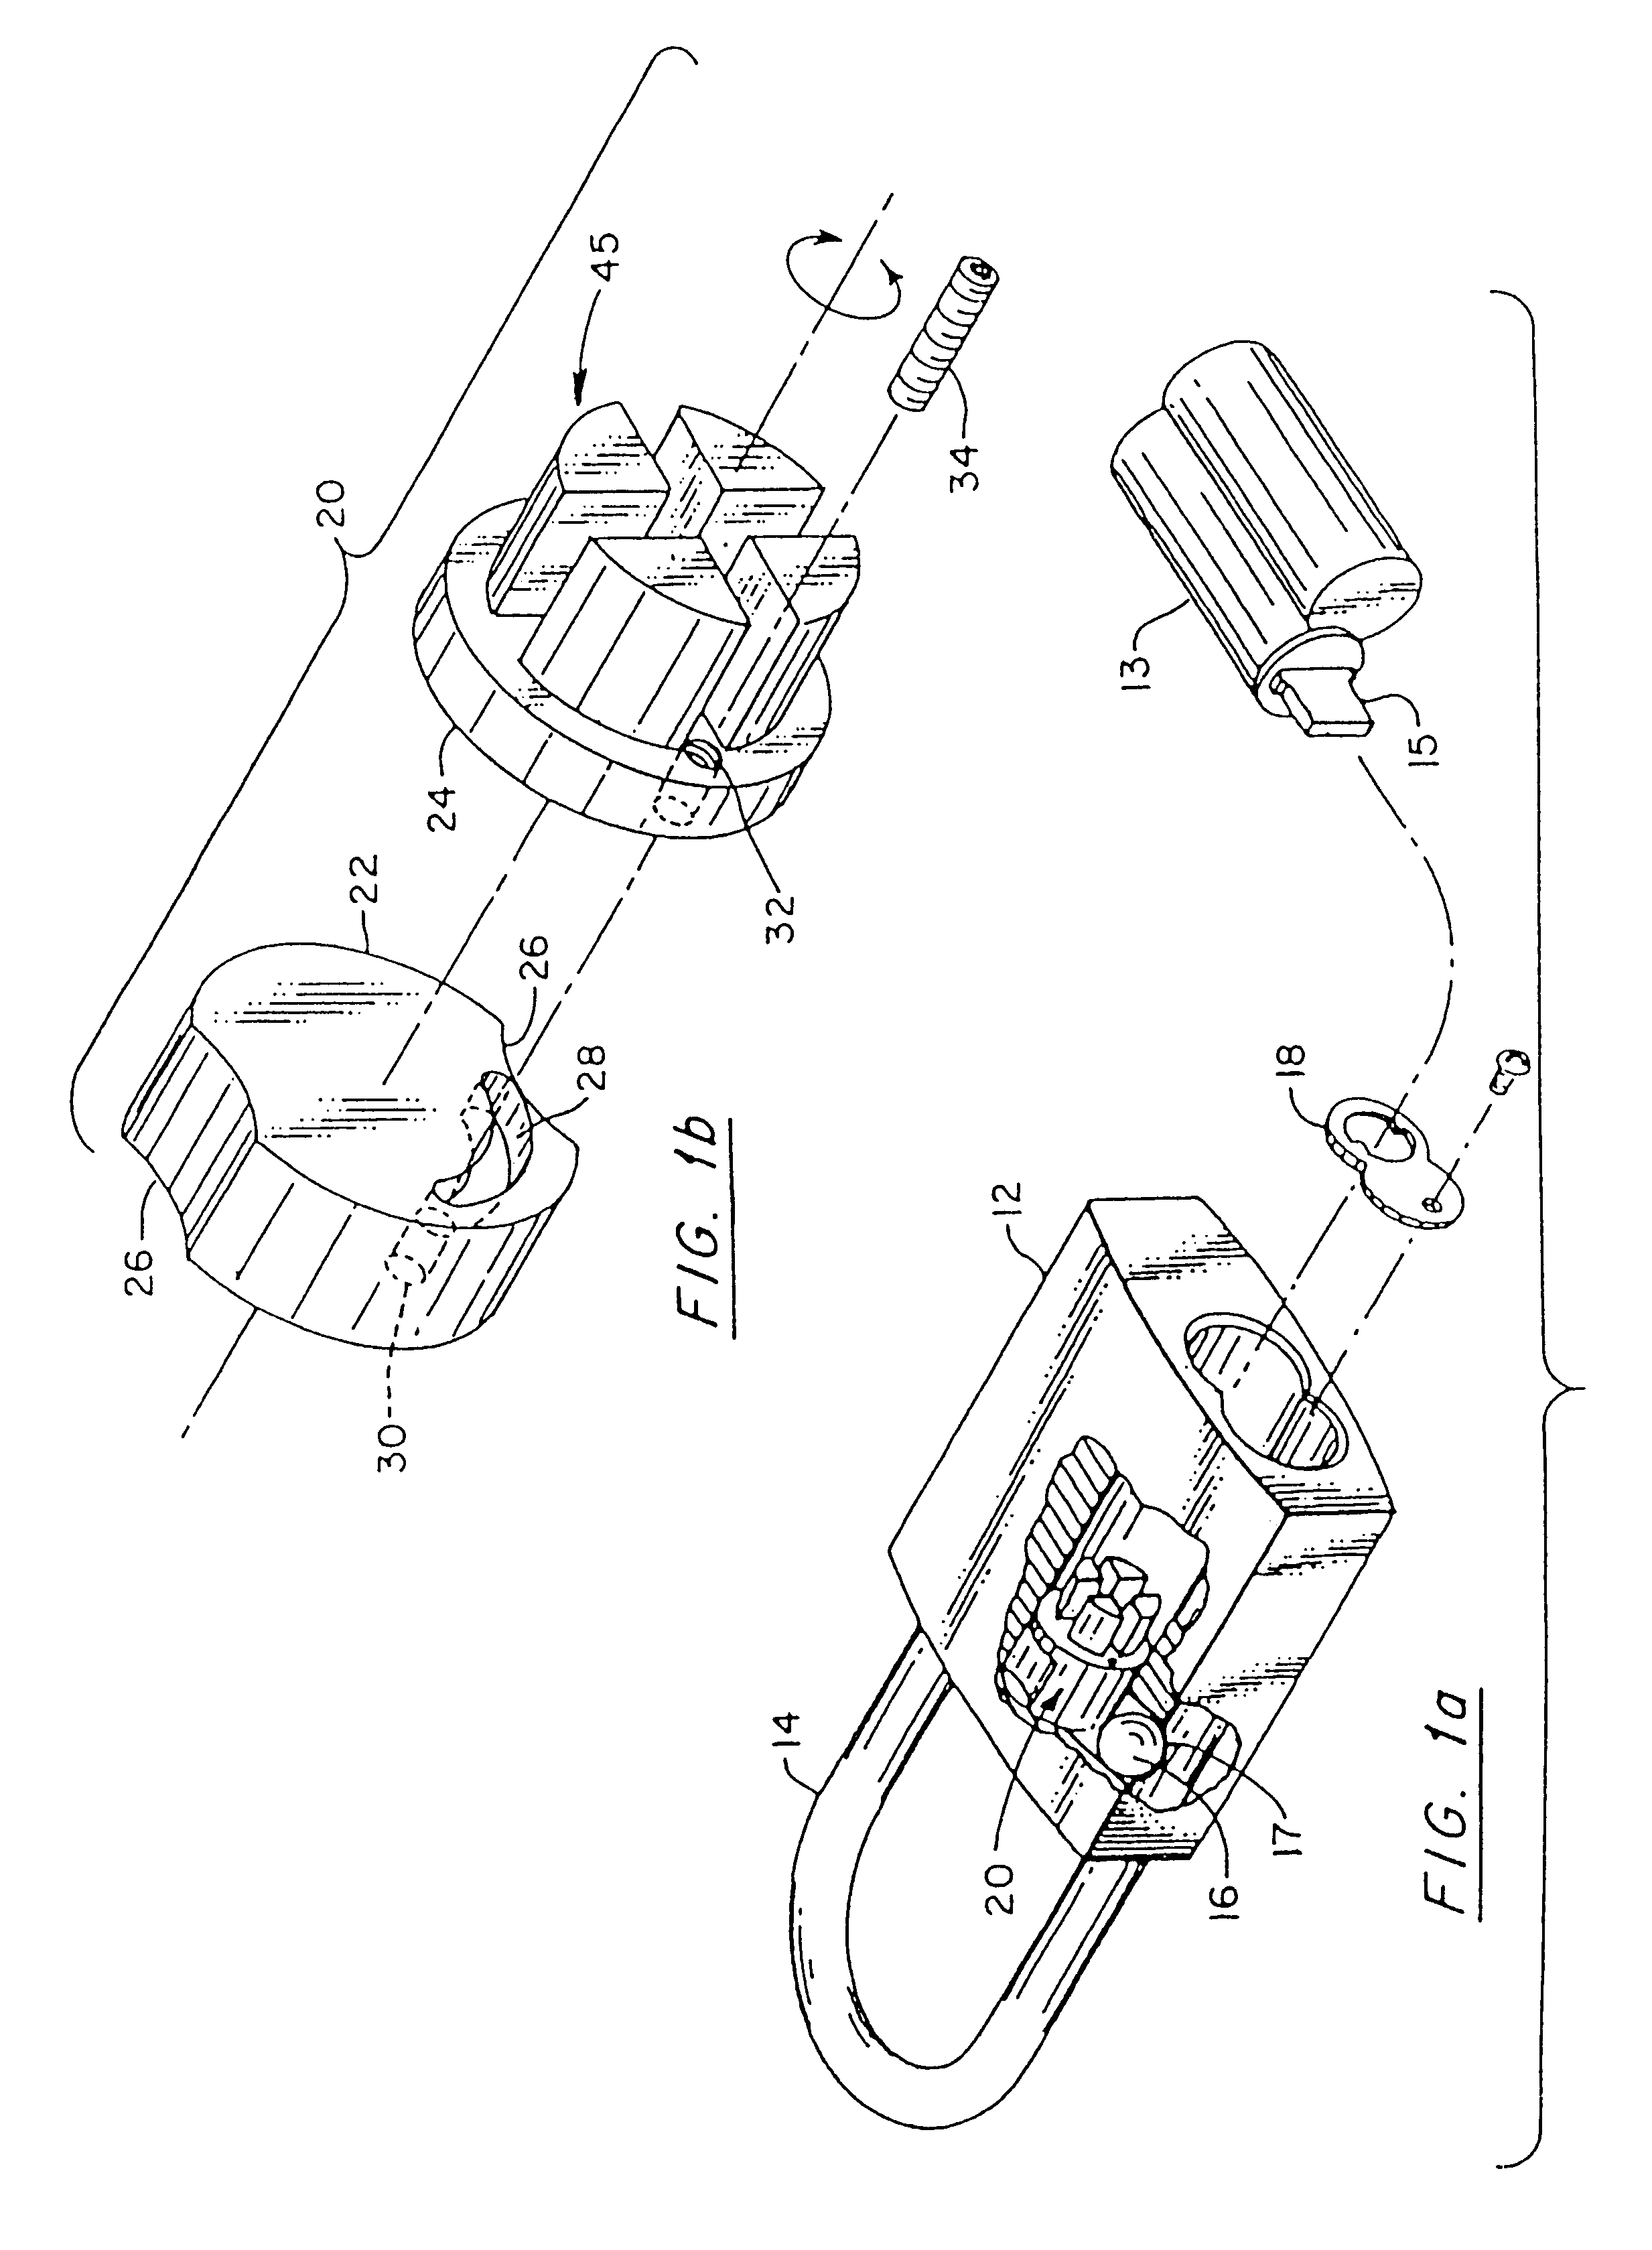 Dual-function locks and sub-assemblies therefor